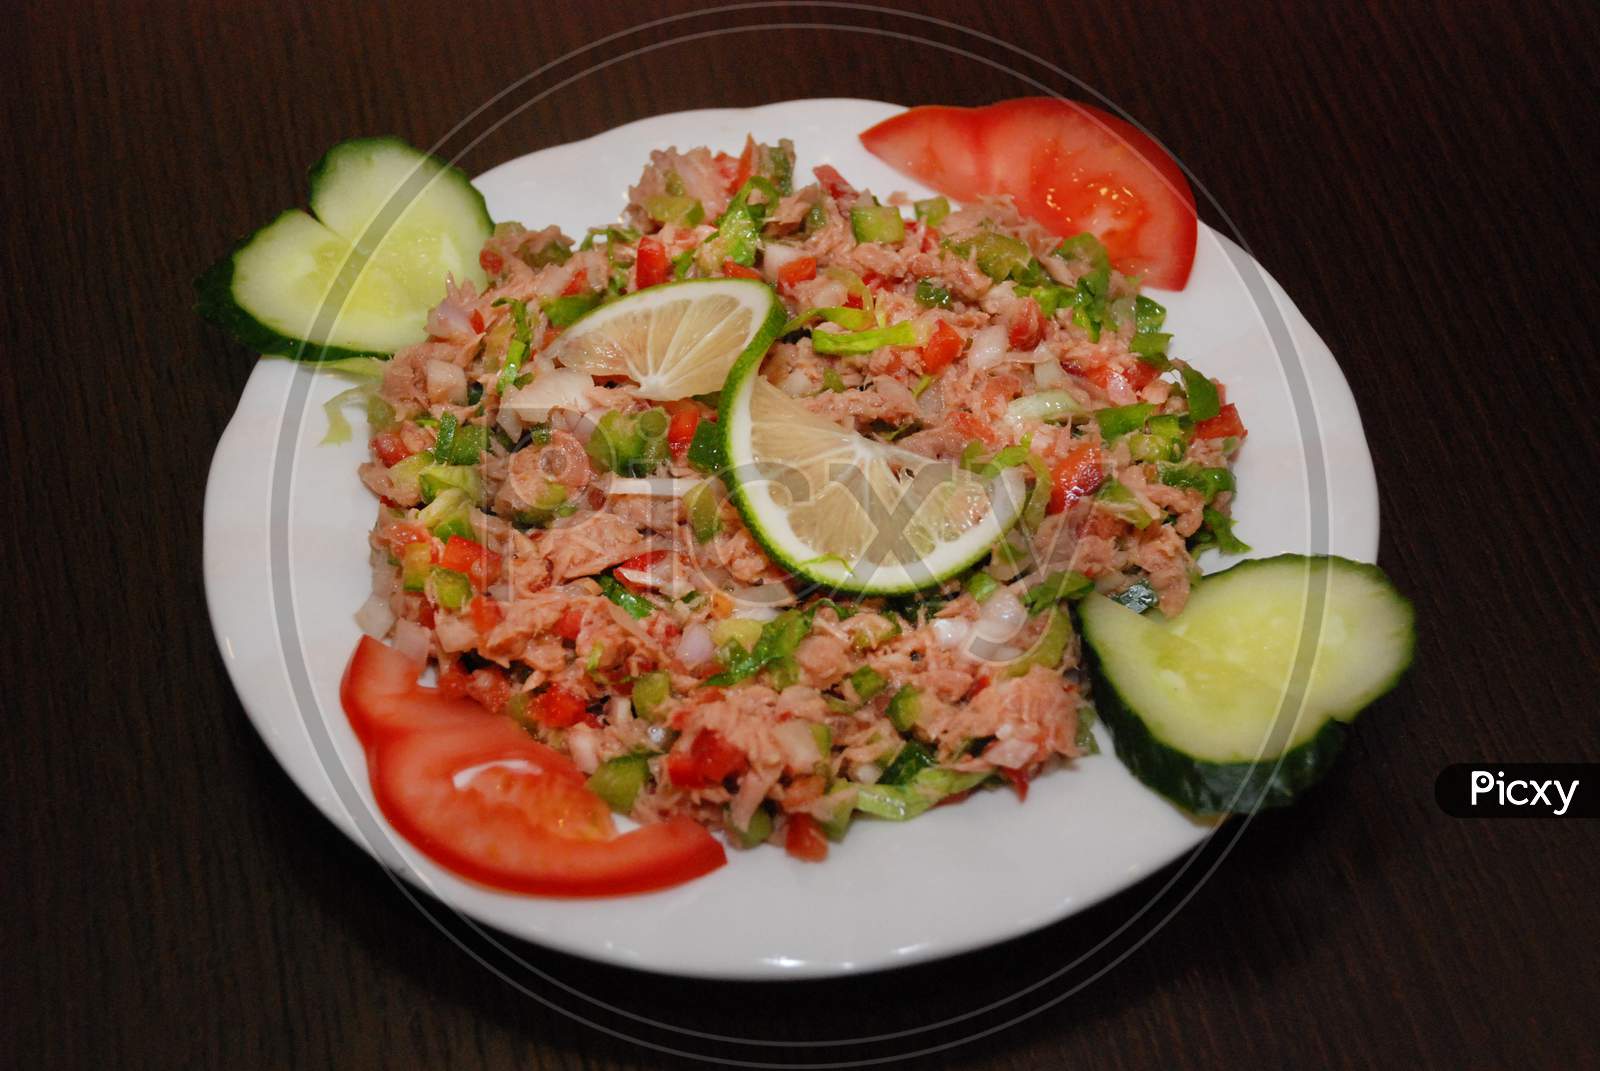 Vegetable Salad With Tuna On The White Plate